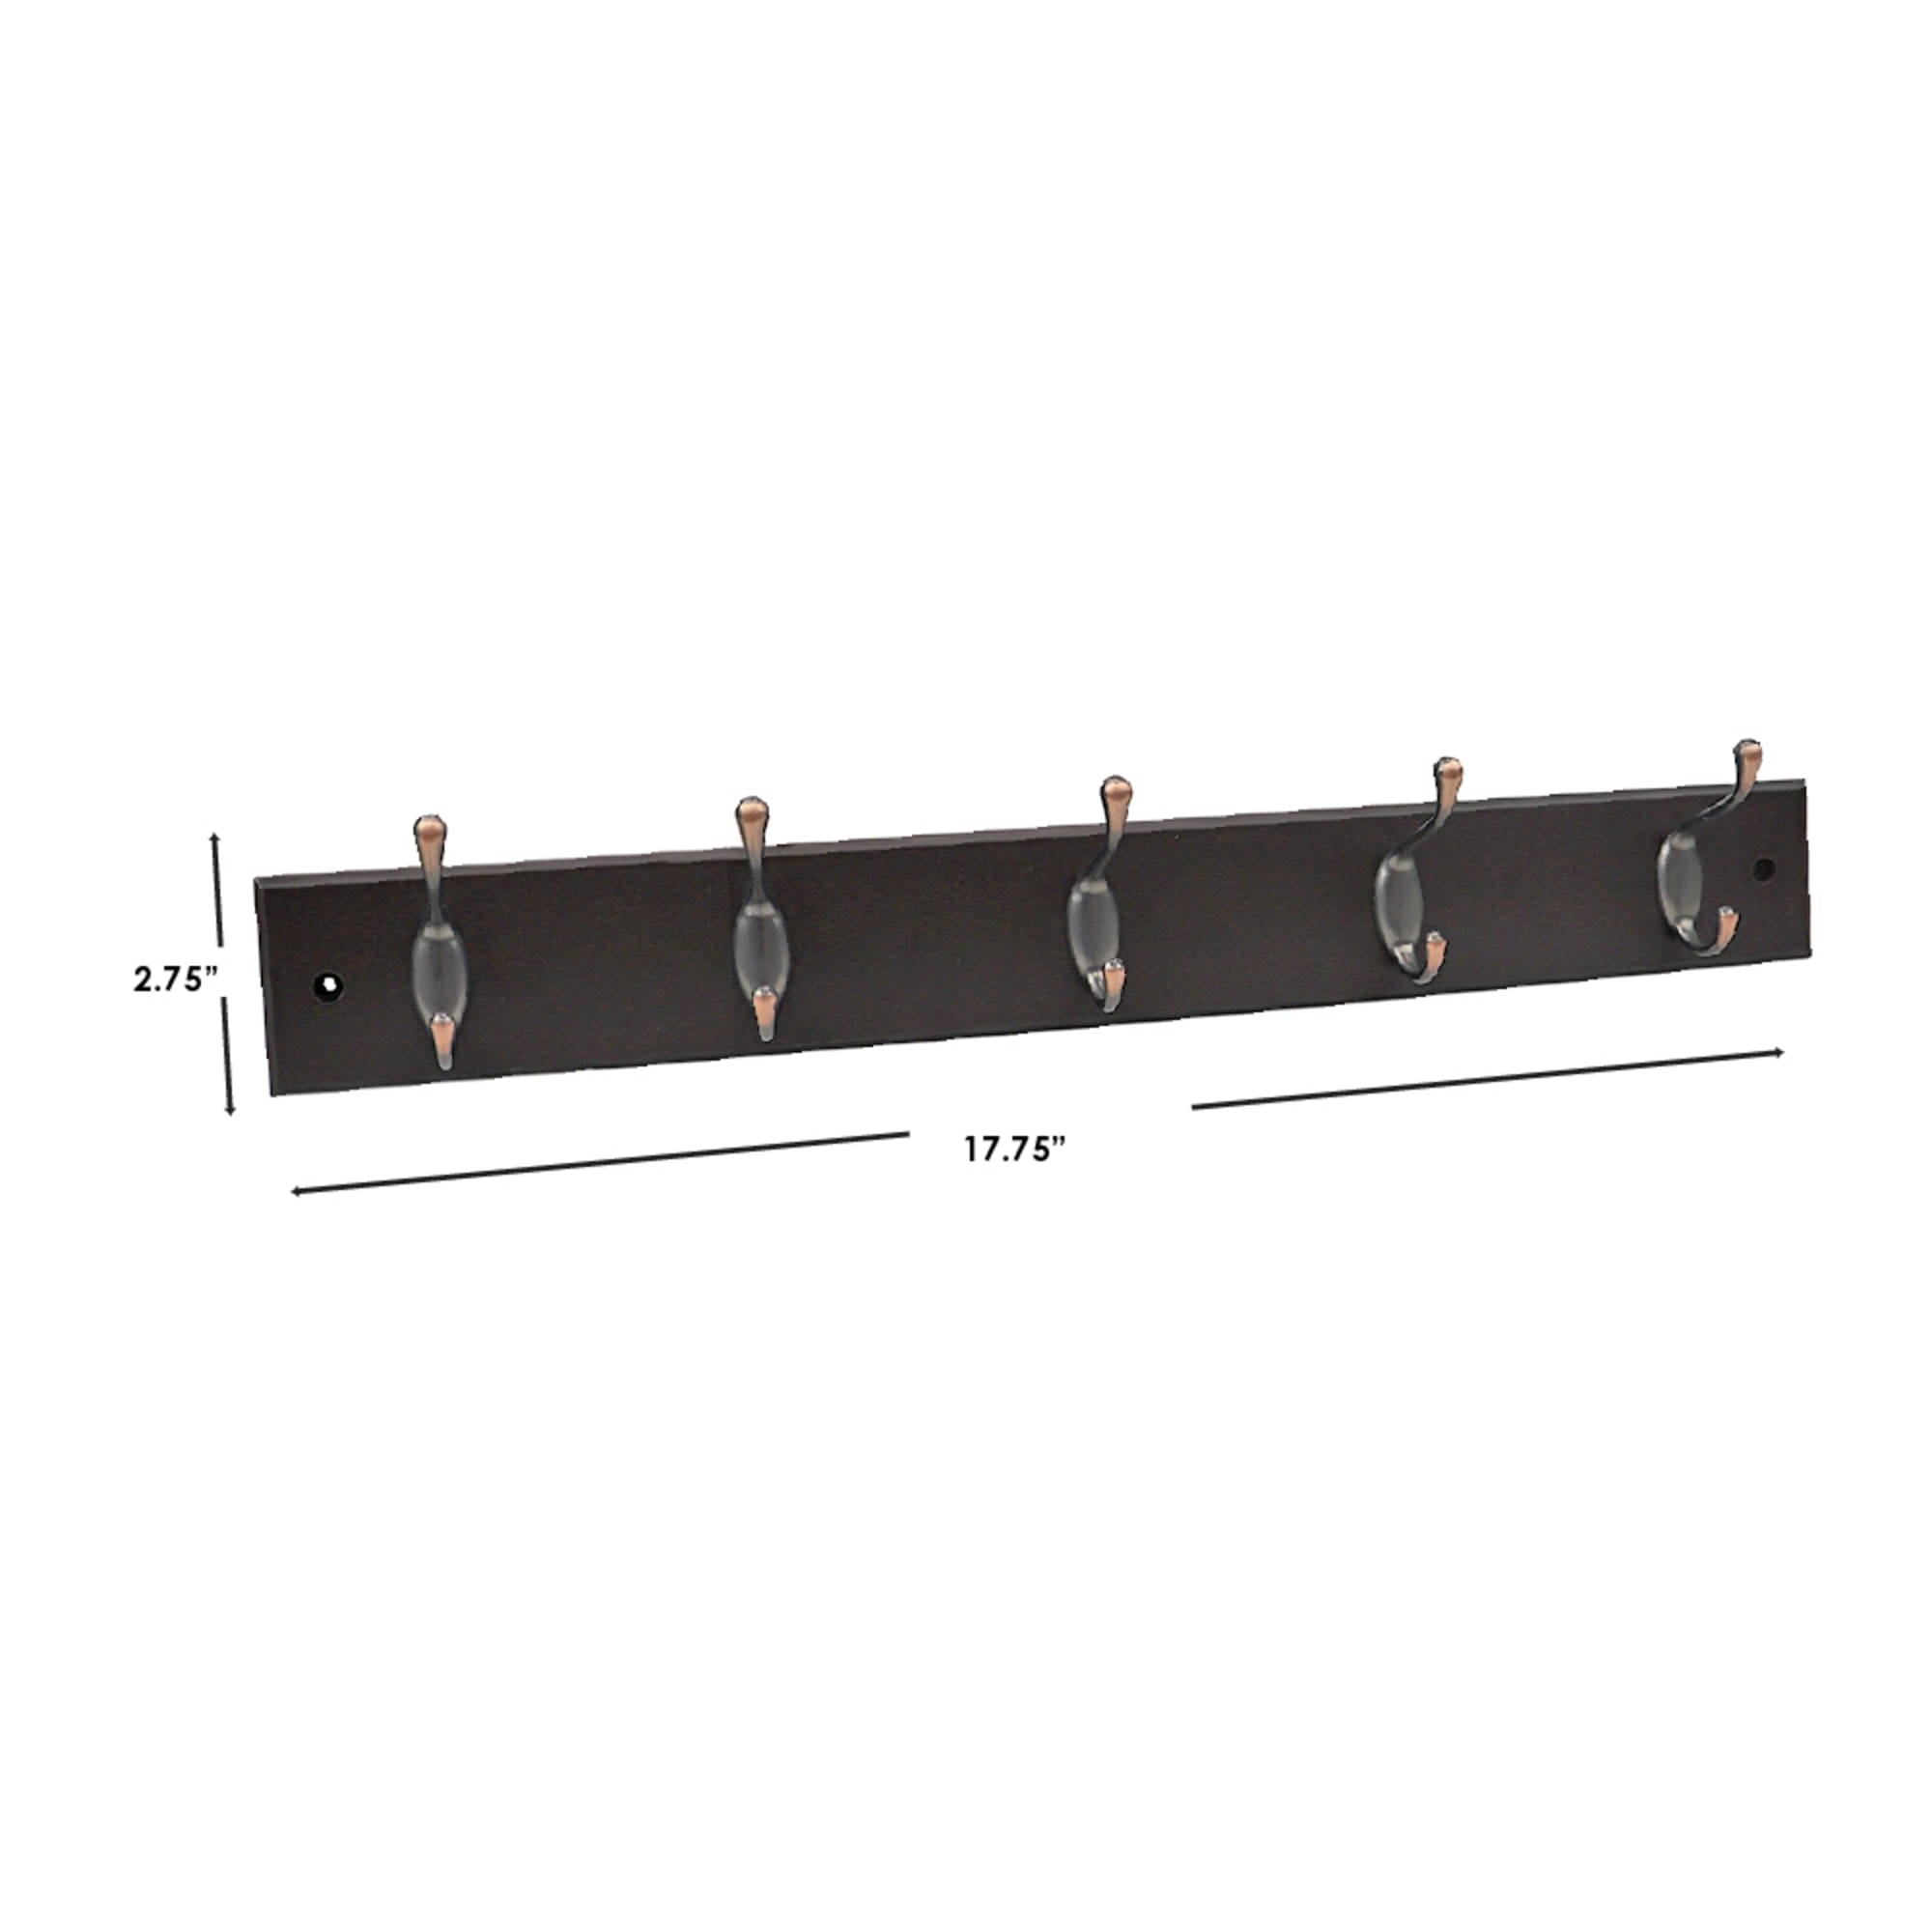 Home Basics 5 Double Hook Wall Mounted Hanging Rack, Brown $12.00 EACH, CASE PACK OF 12